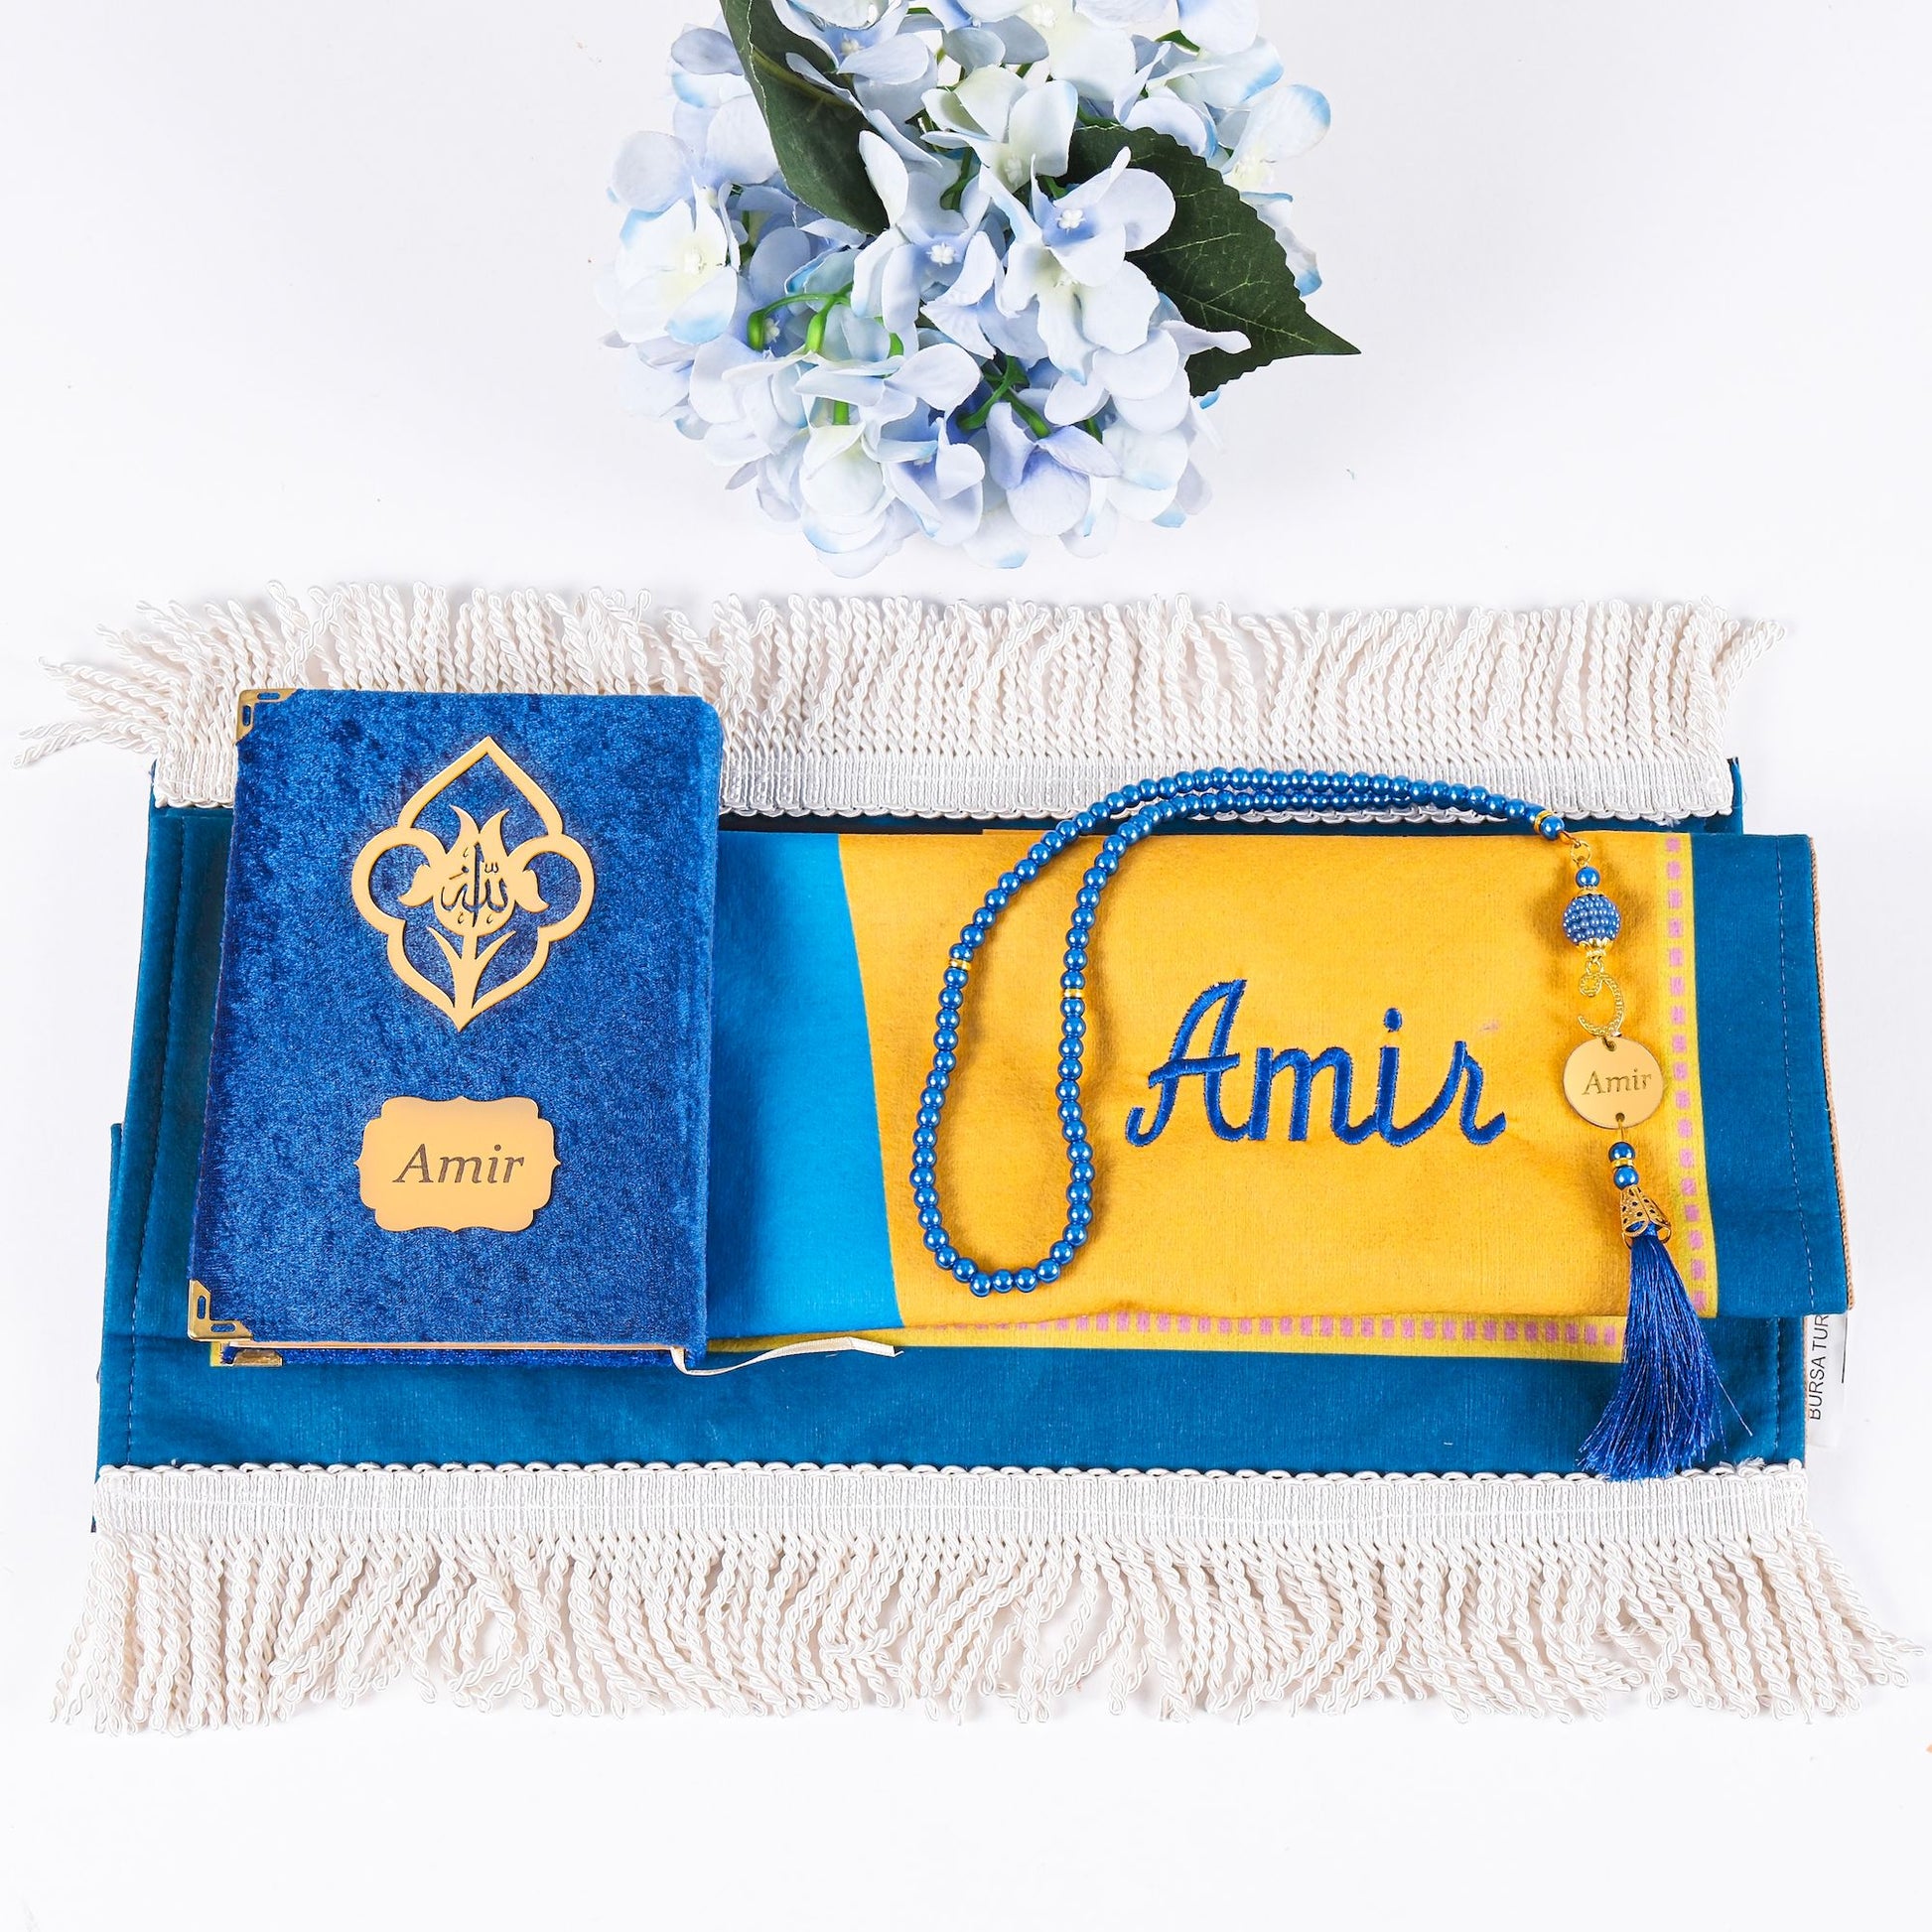 Personalized Kids Prayer Mat Quran Tasbeeh Ramadan Gift Set for Boys - Islamic Elite Favors is a handmade gift shop offering a wide variety of unique and personalized gifts for all occasions. Whether you're looking for the perfect Ramadan, Eid, Hajj, wedding gift or something special for a birthday, baby shower or anniversary, we have something for everyone. High quality, made with love.